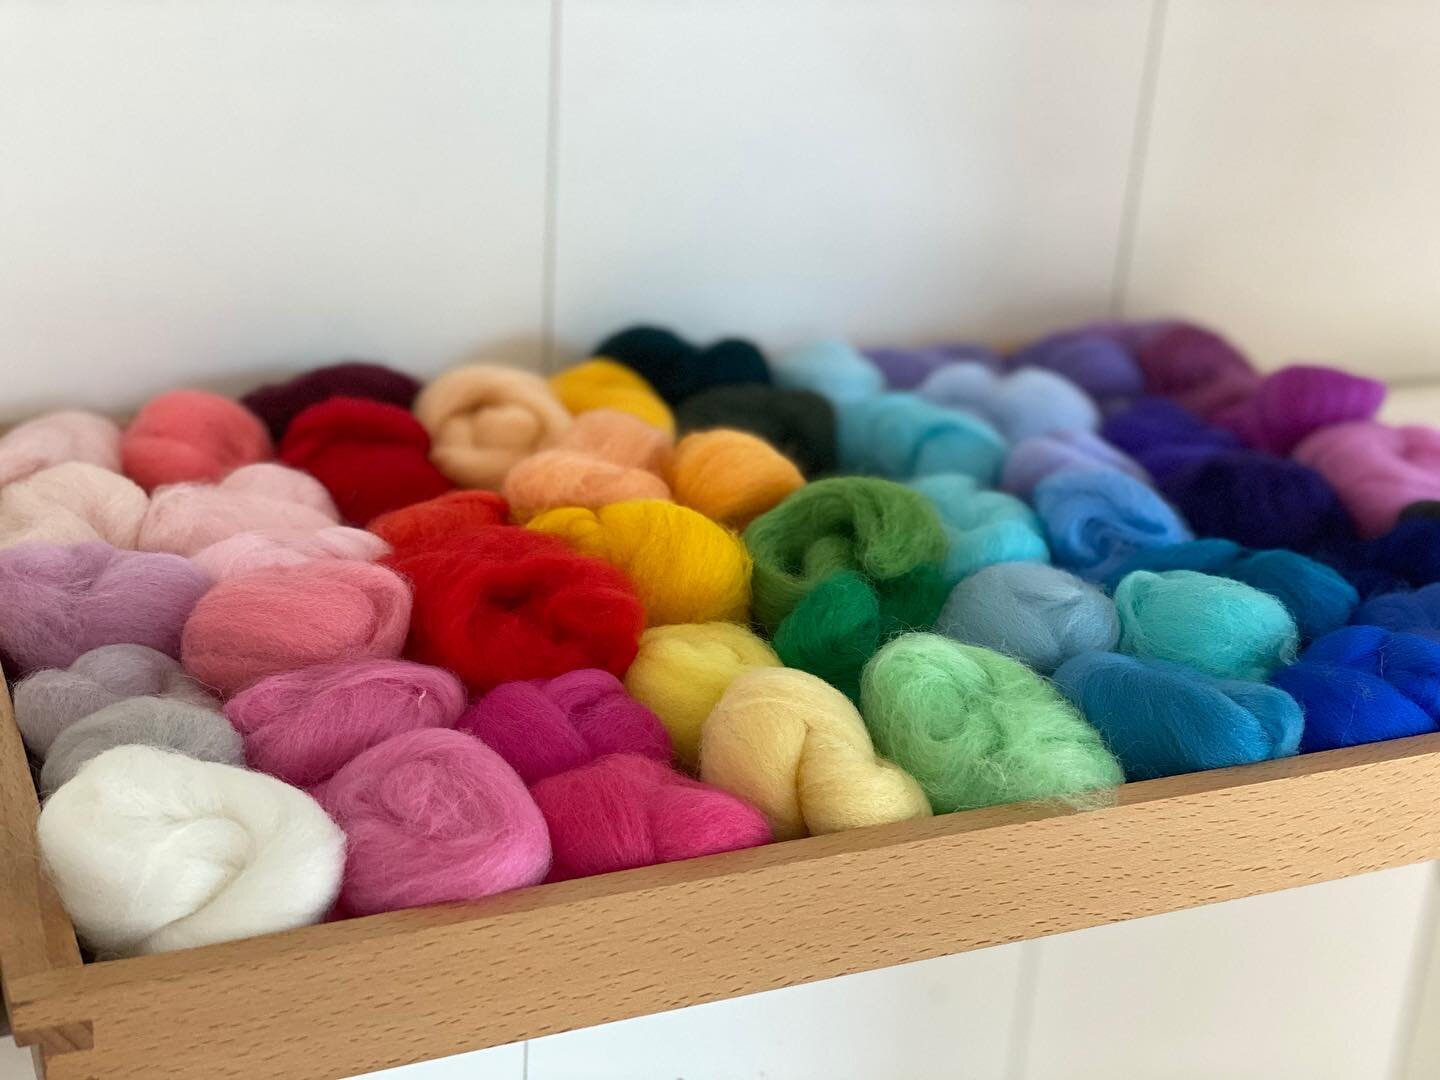 Building an imaginary island for one of our geography projects and oh my are they creative! I added new, colorful, wool balls to the atelier shelves to introduce a new texture to our open-ended materials selection.